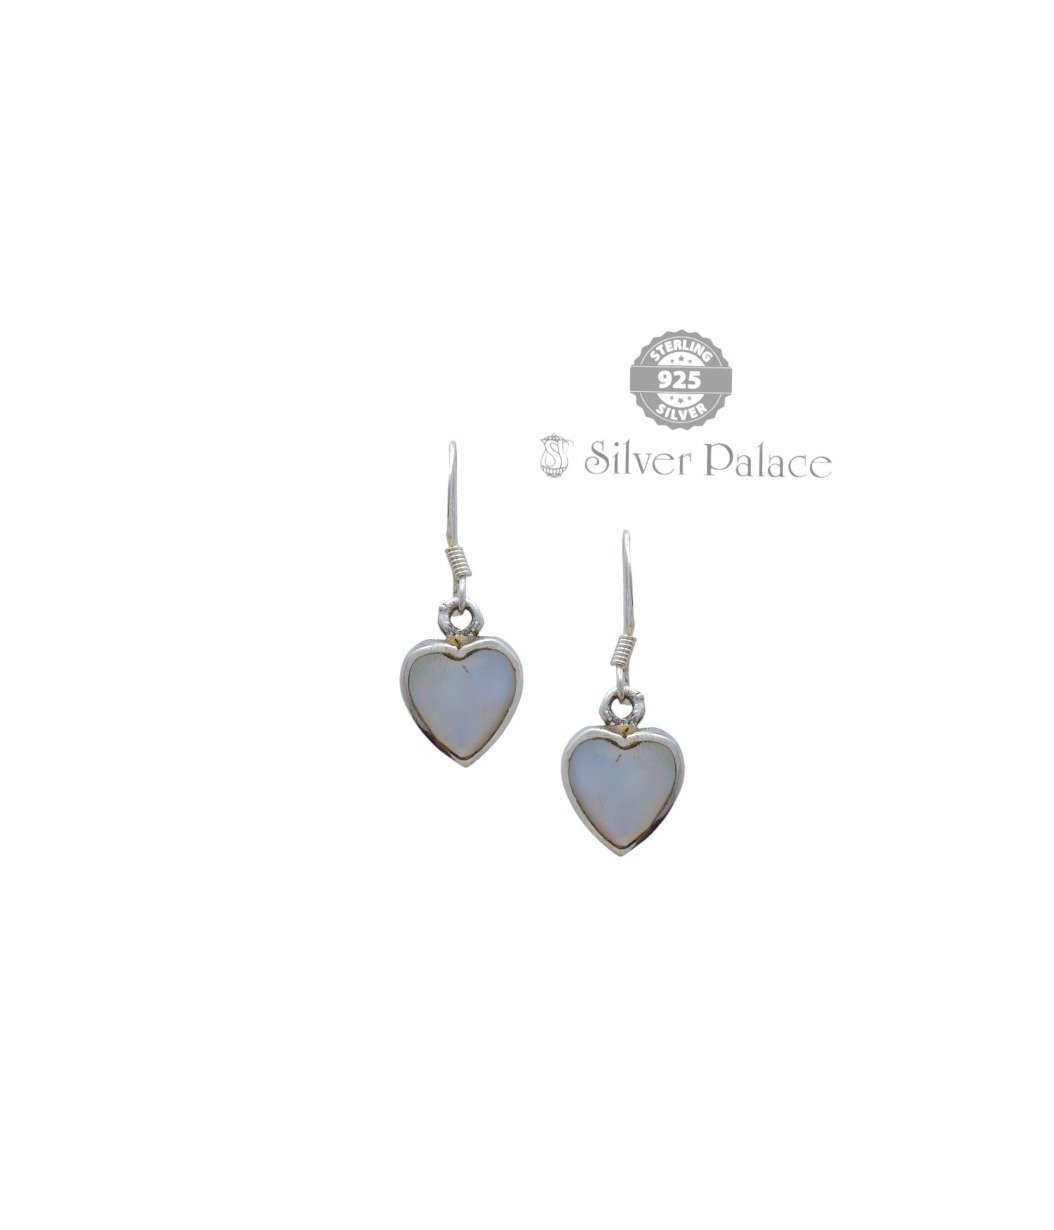 92.5 Sterling Silver Trishe Collection Mother of Pearl Heart Dangle Earrings